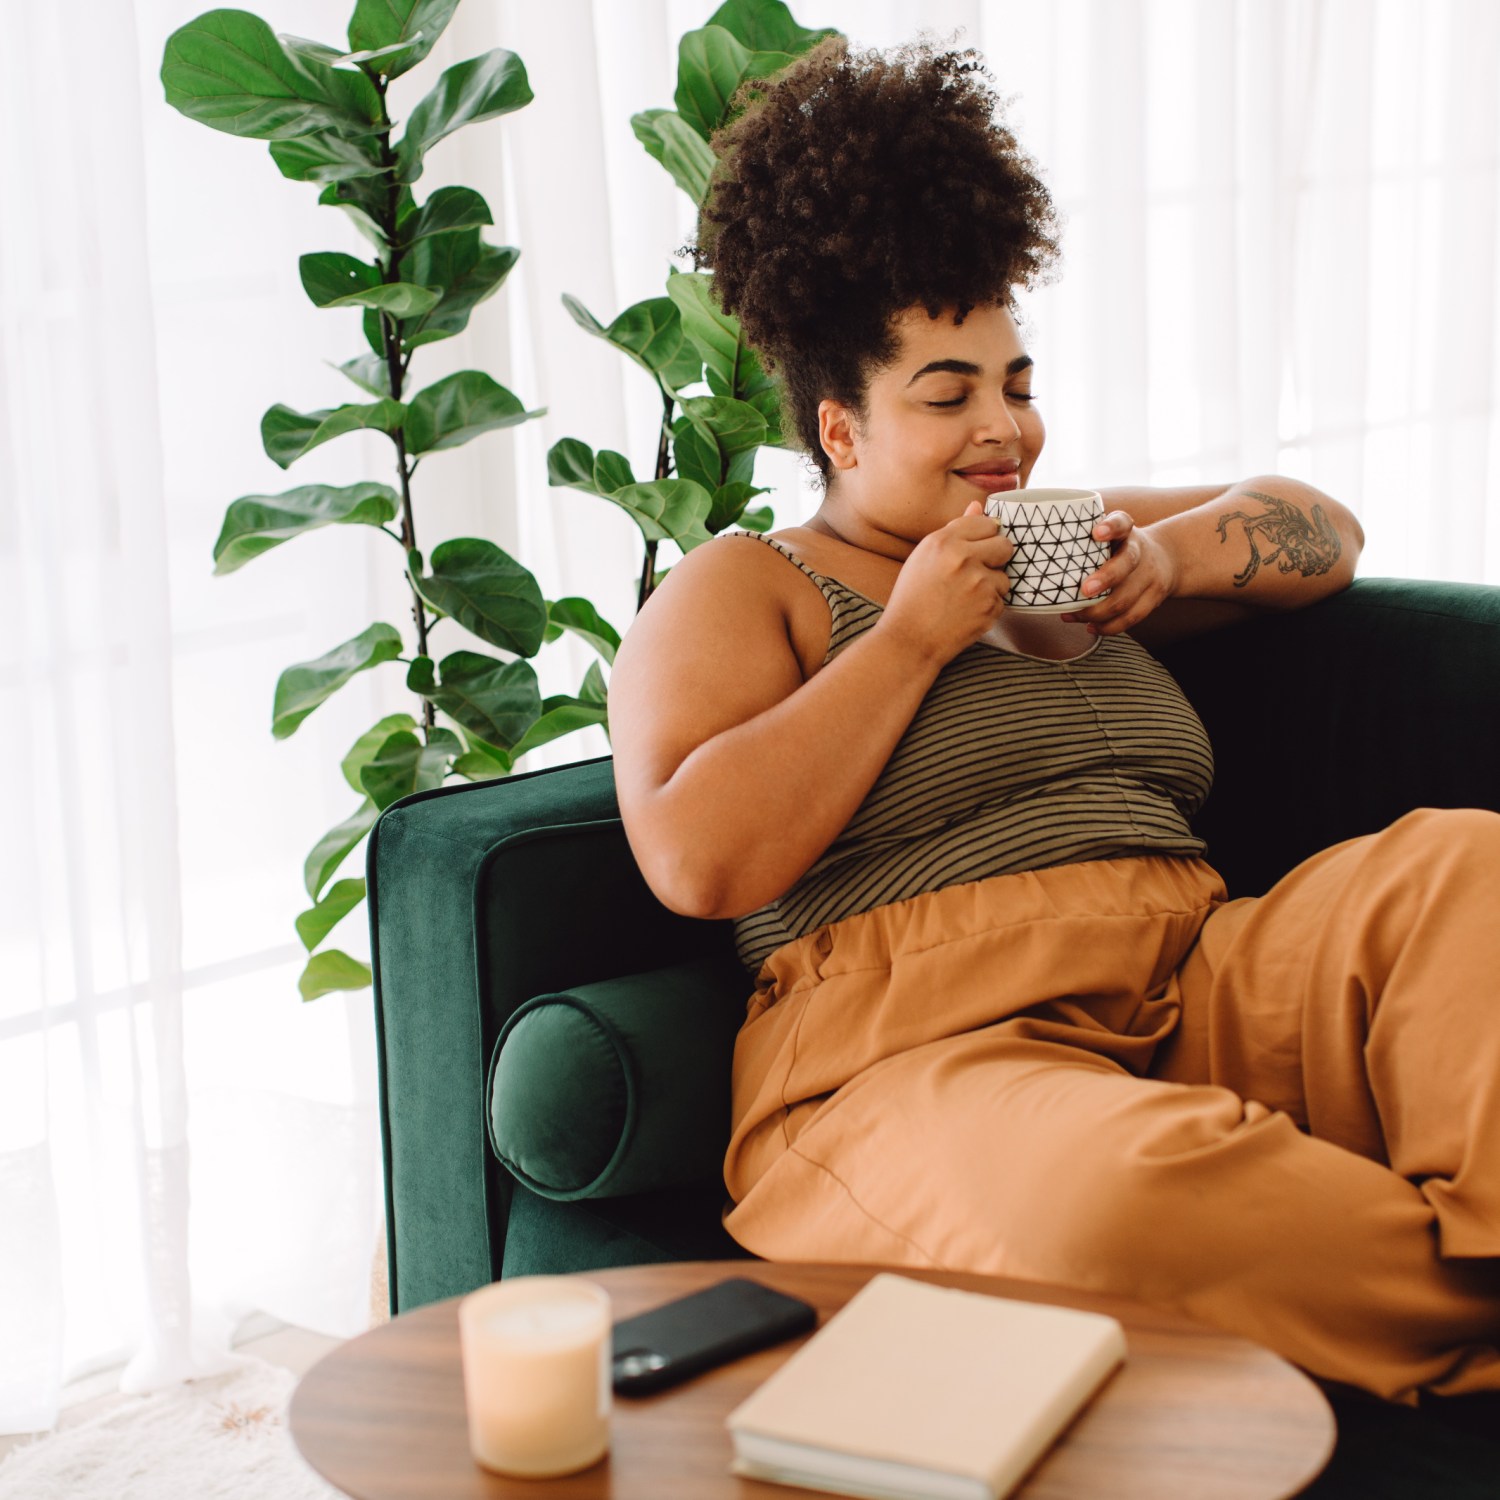 a beautiful woman at home relaxing on a green sofa holding a cup of coffee